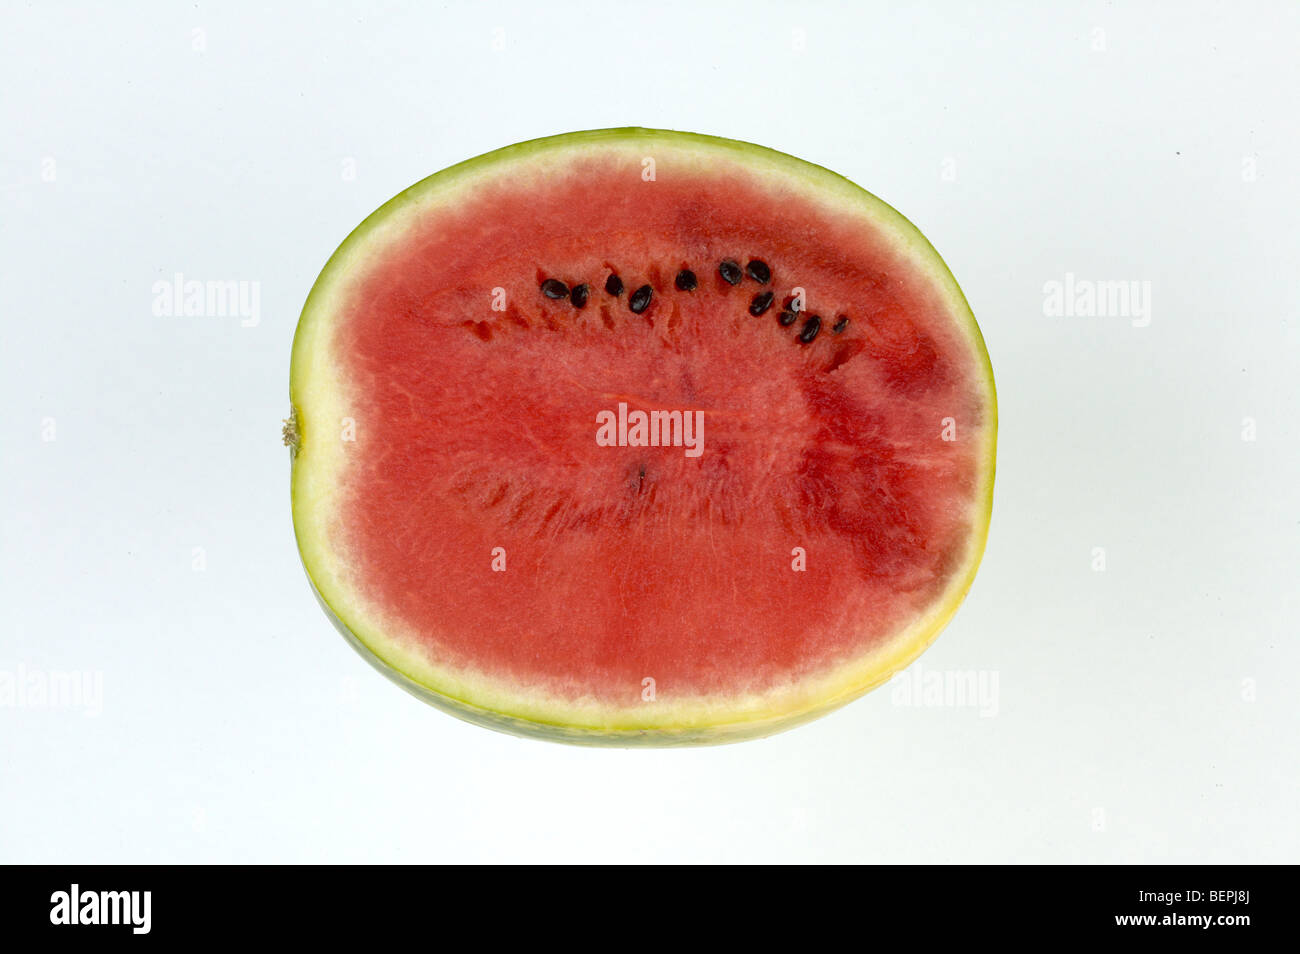 Studio shot of water melon cut in half and suspende in mid air Stock Photo